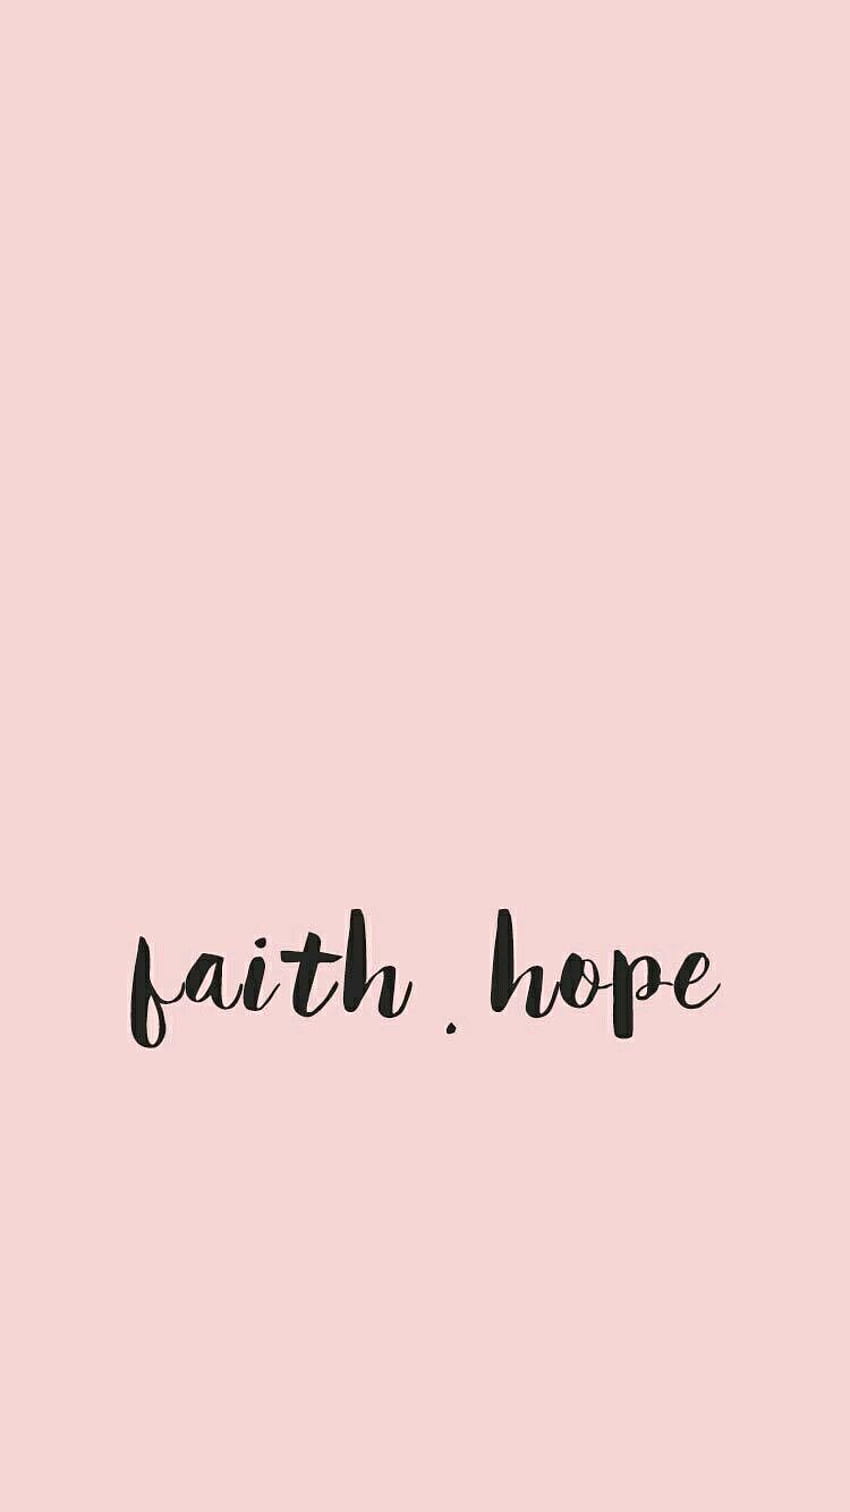 Daily Hope And Faith Quotes 4 Motivational Poster Set Collection For Wall  Decor Paper Print - Quotes & Motivation posters in India - Buy art, film,  design, movie, music, nature and educational